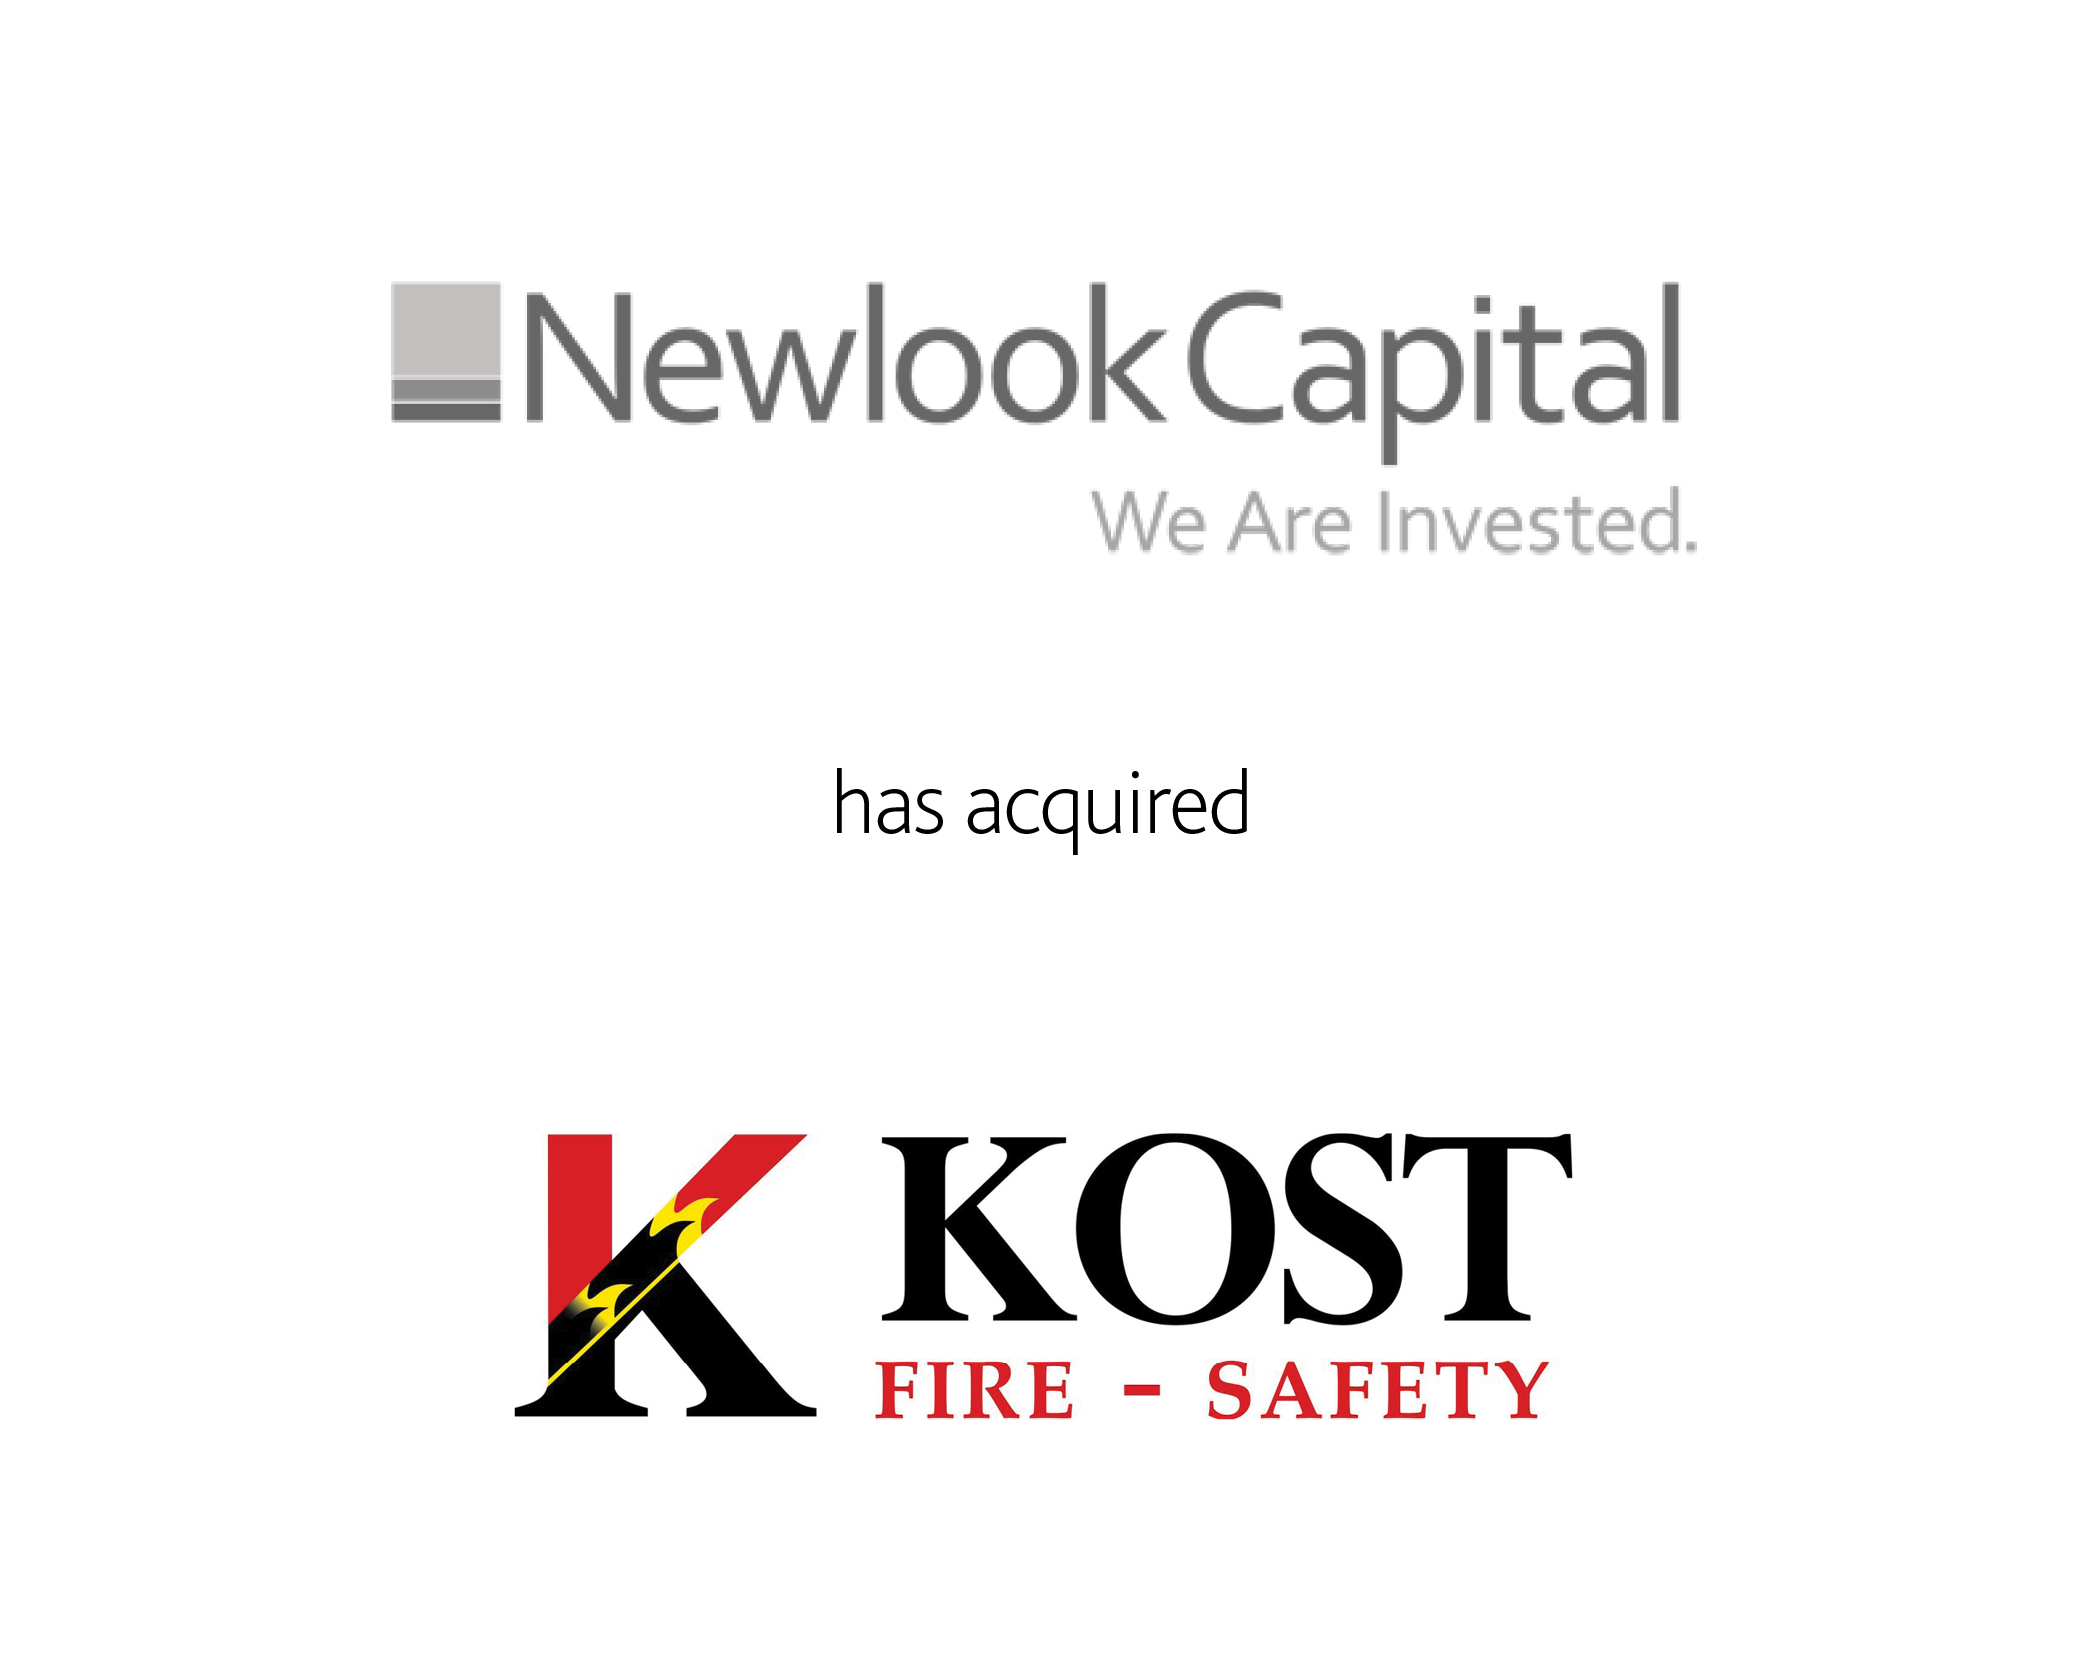 Newlook Capital and KOST logos.